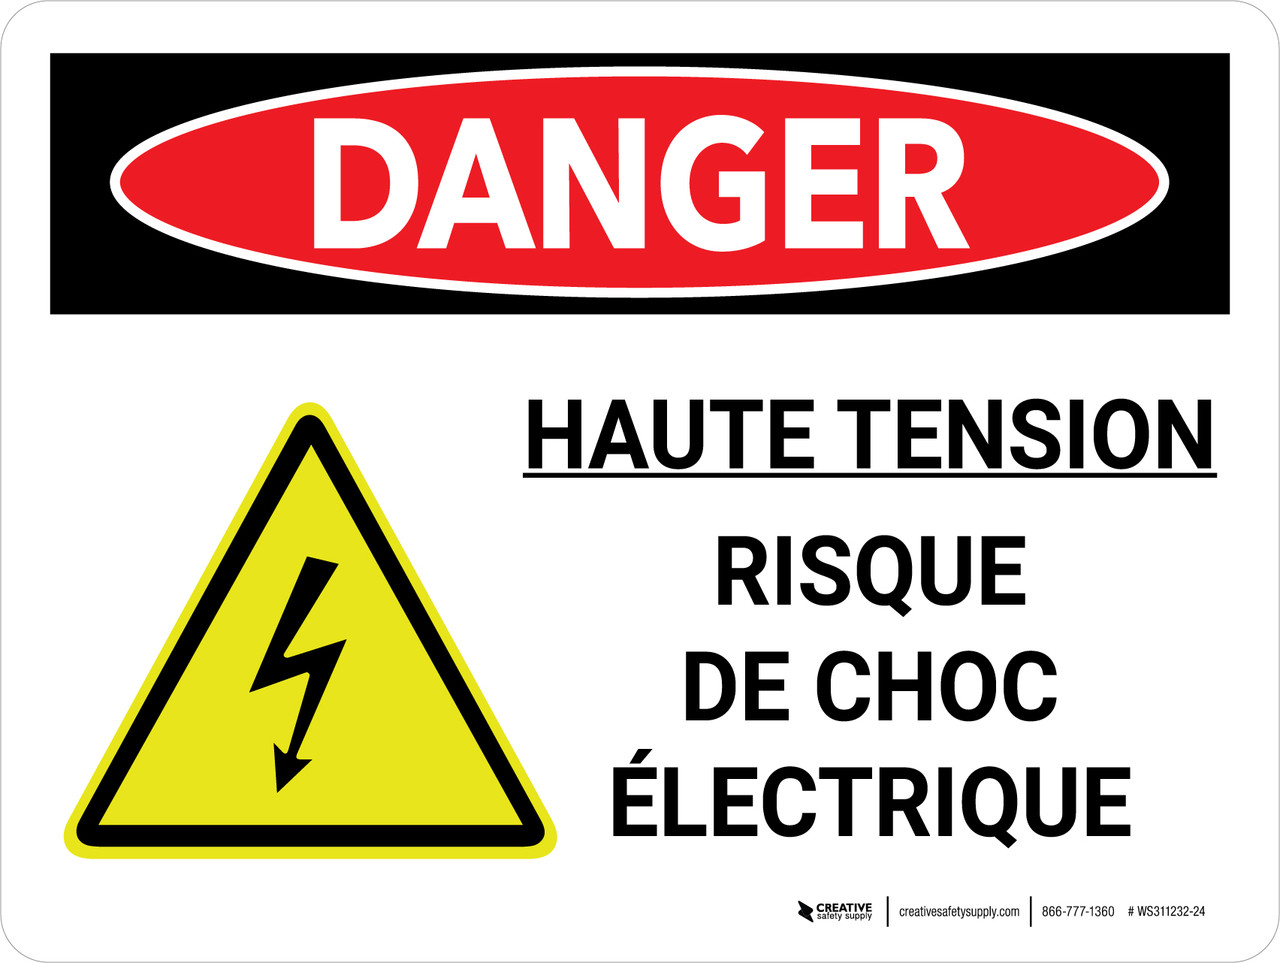 electrical shock sign